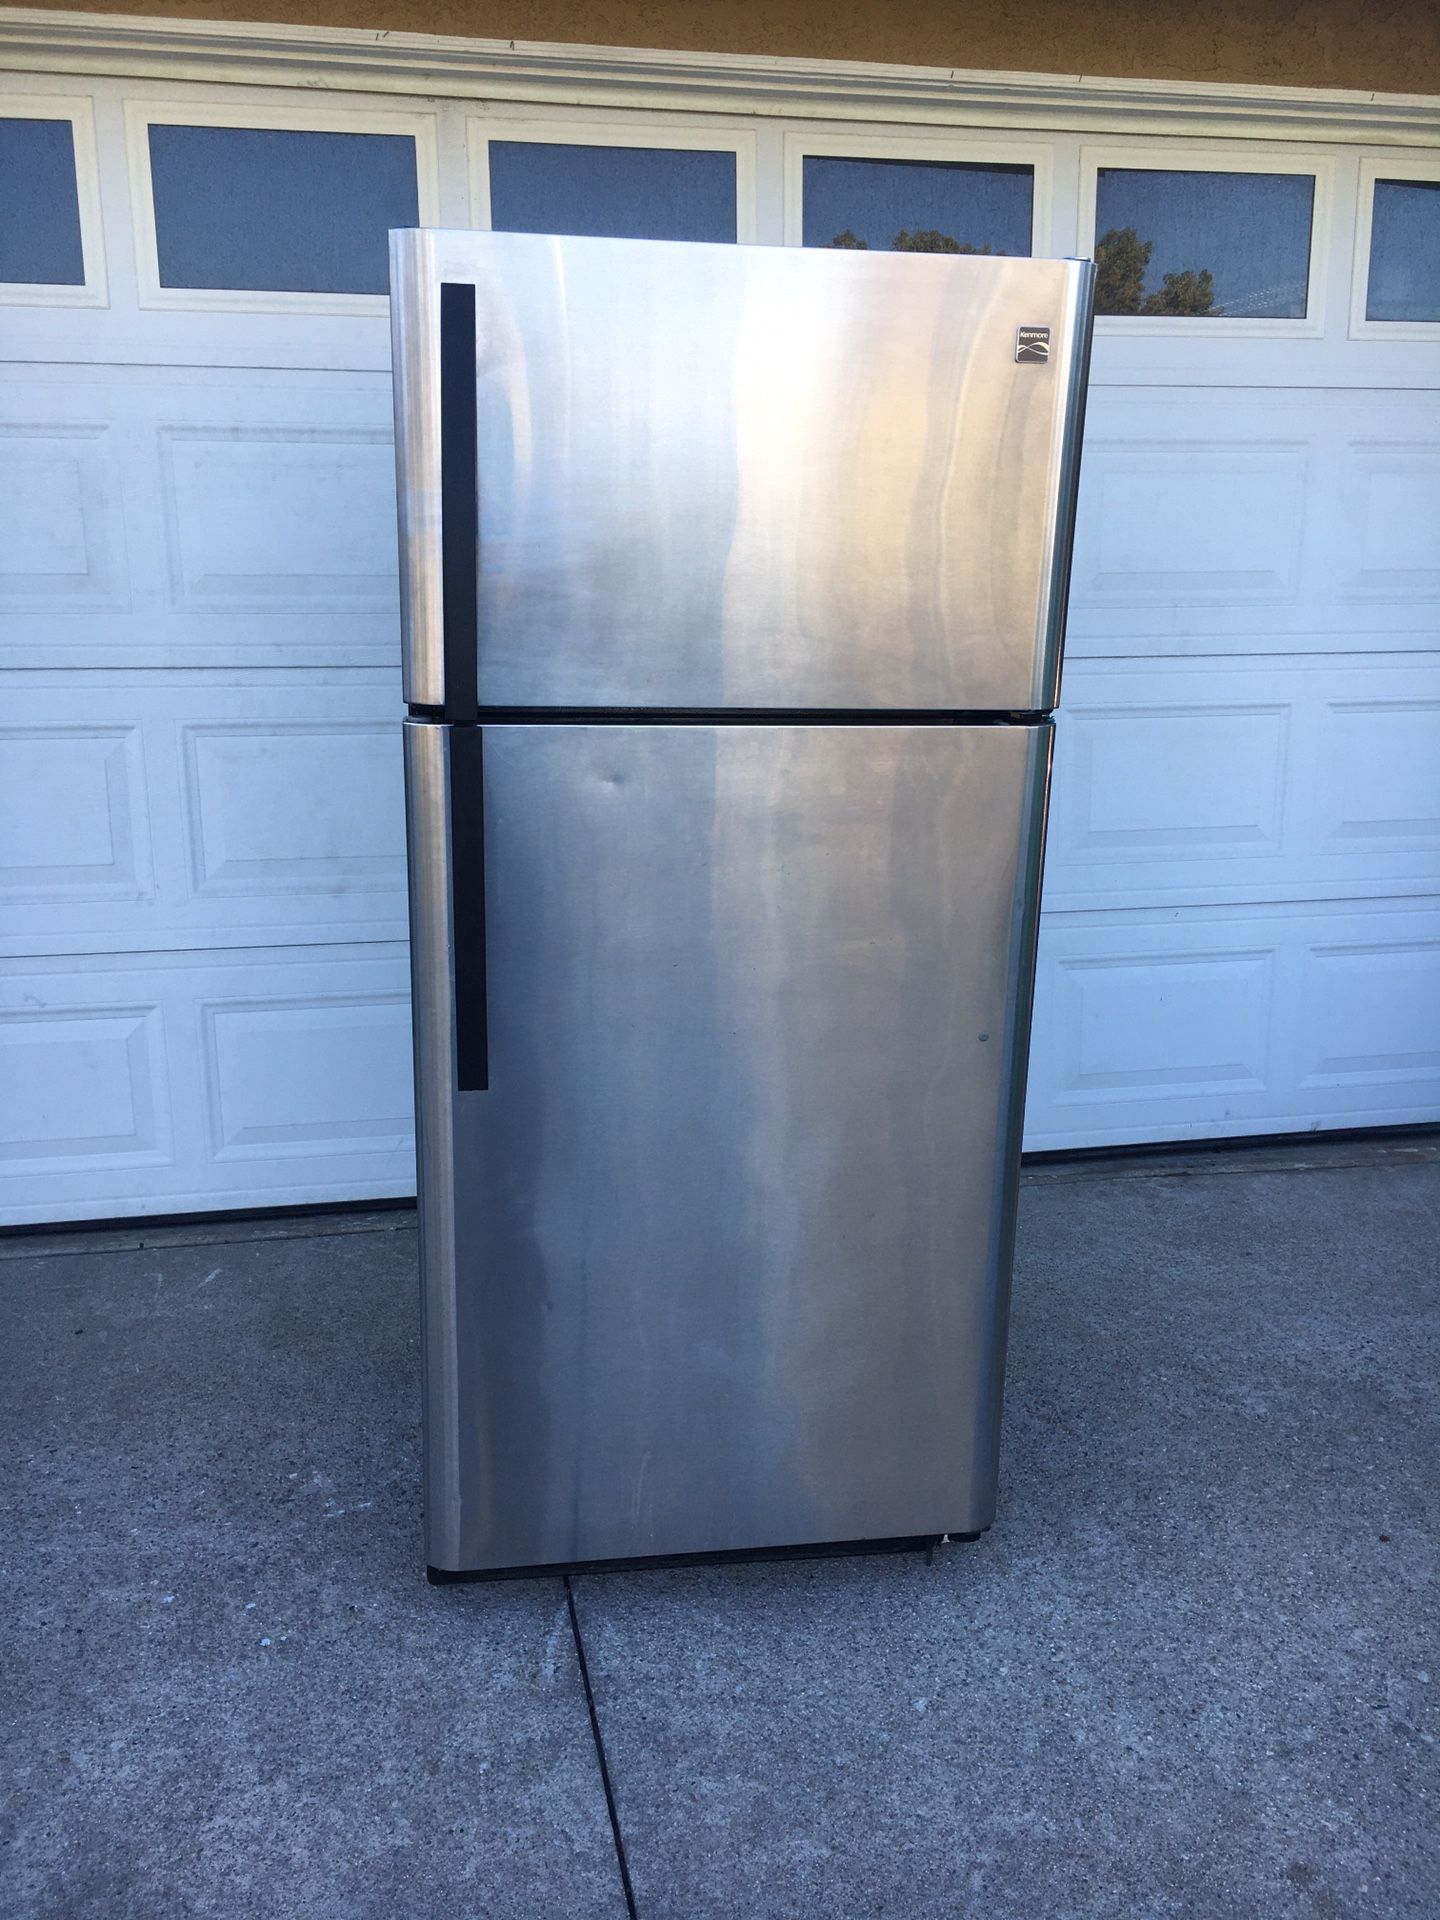 Stainless steel kenmore refrigerator w/ ice maker works excellent